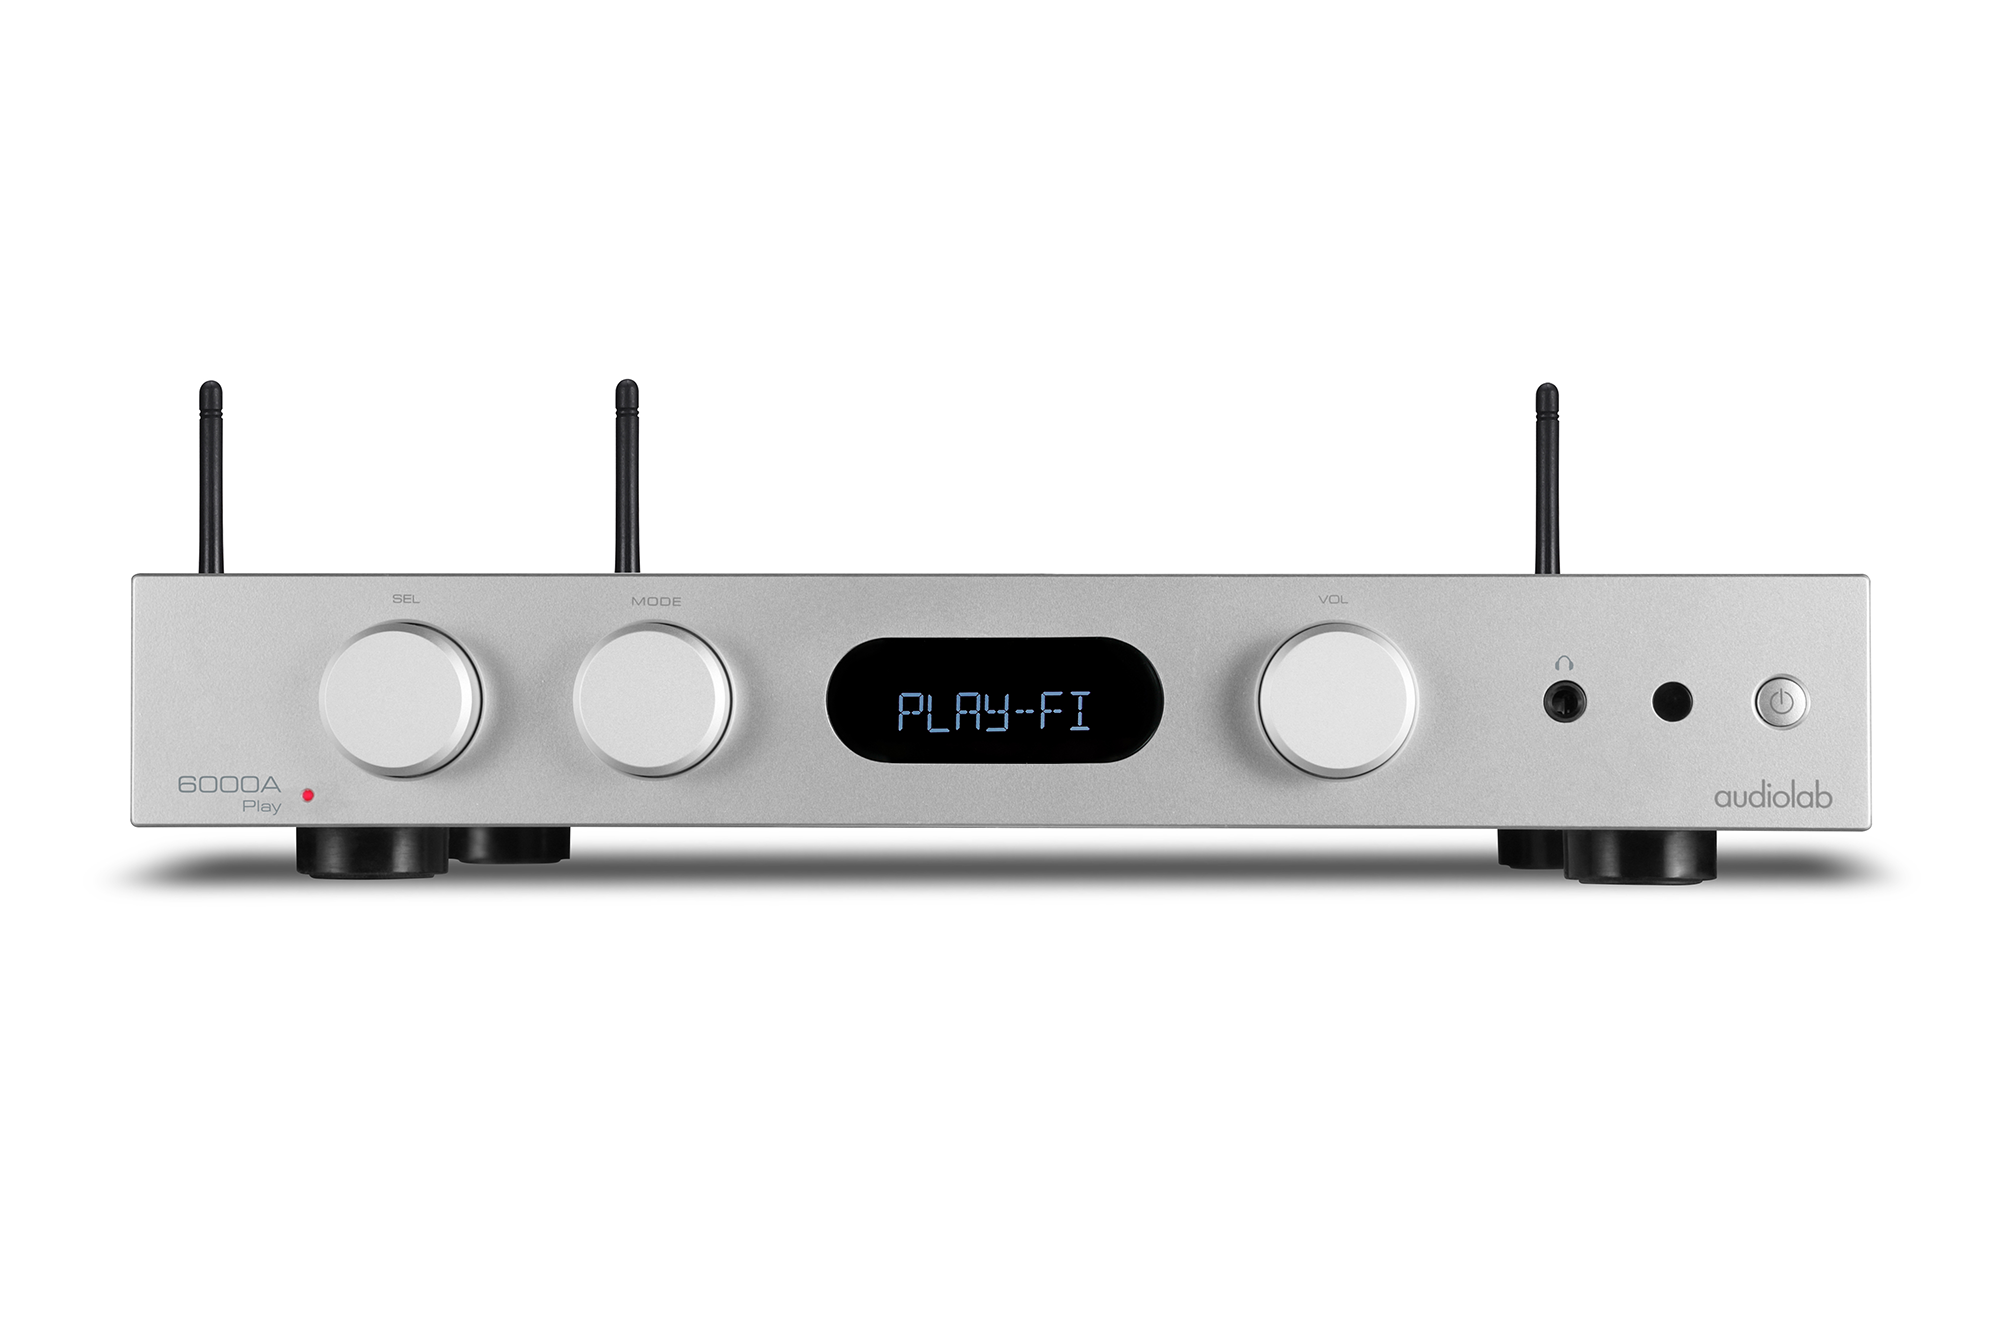 Audiolab 6000A Play Wireless Audio Streaming Player